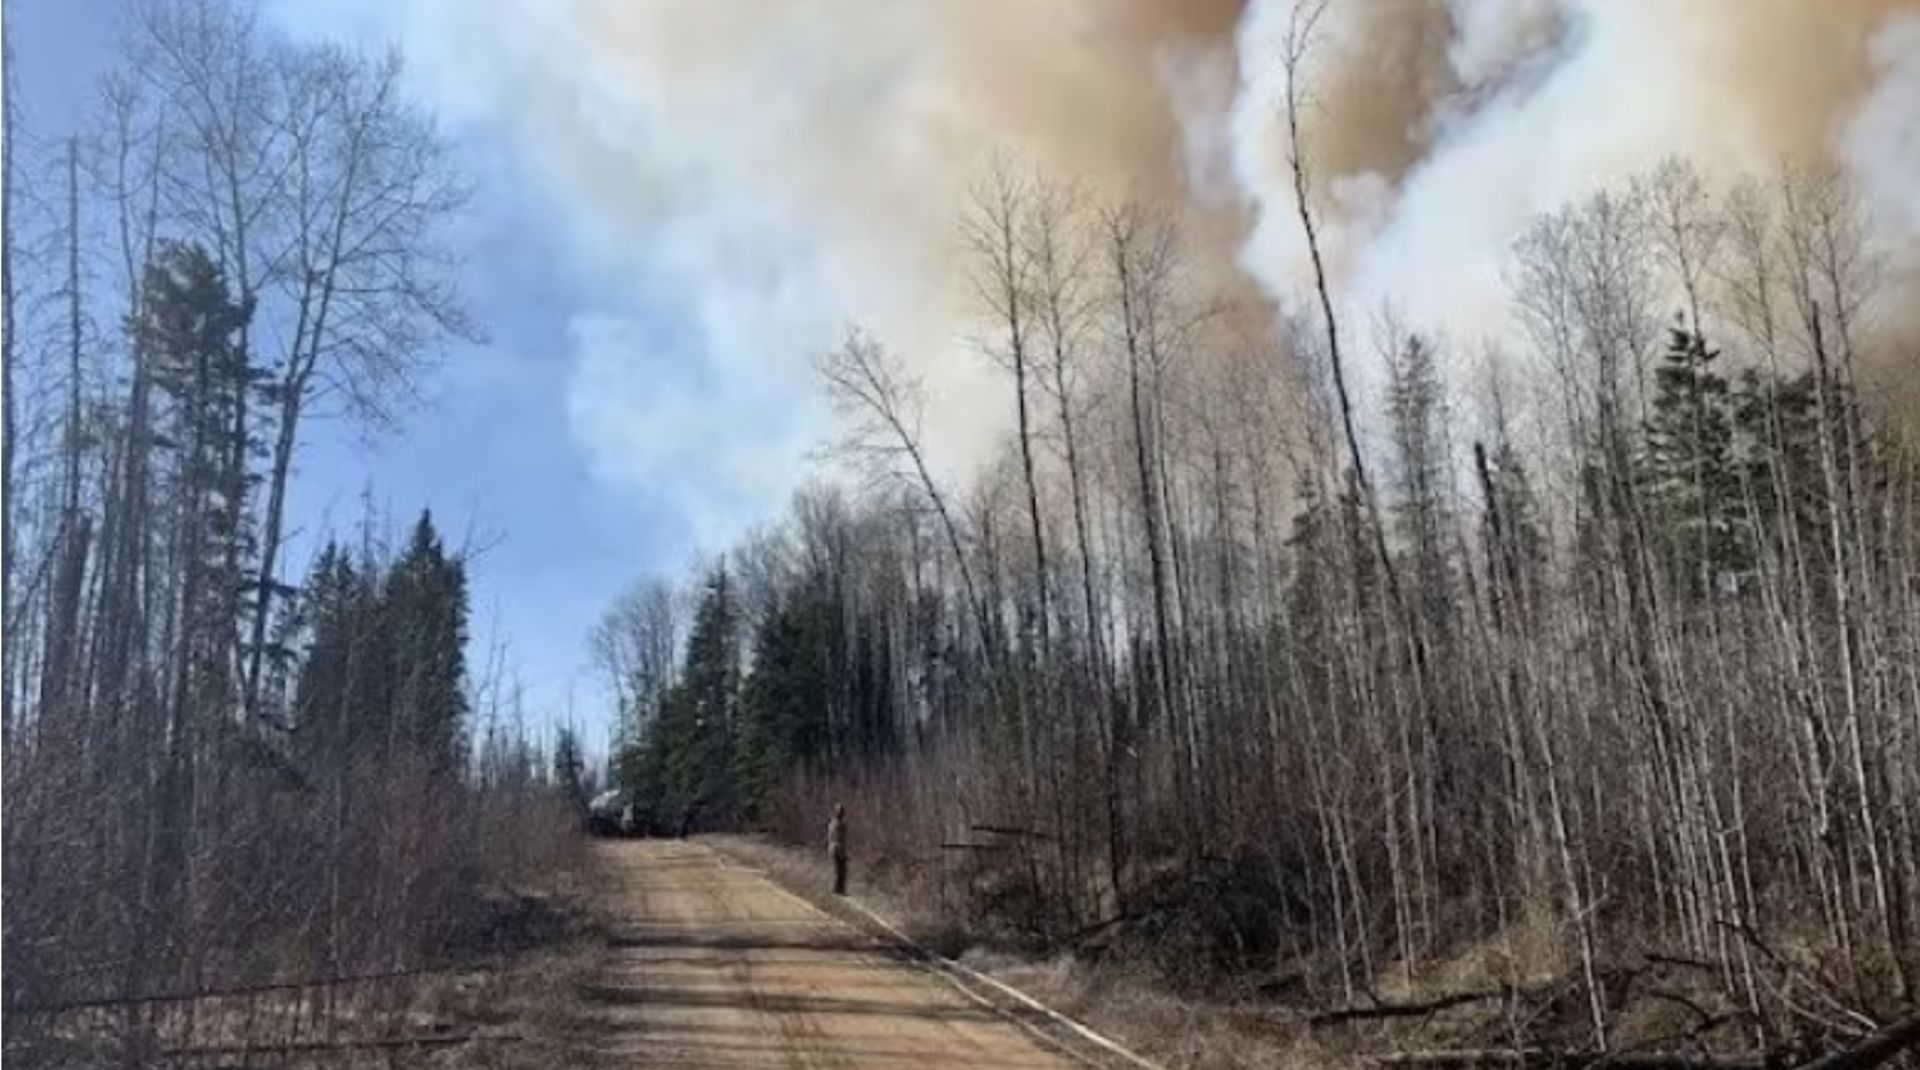 Wildfires prompt alerts for hamlet near Fort McMurray, Cold Lake First Nations